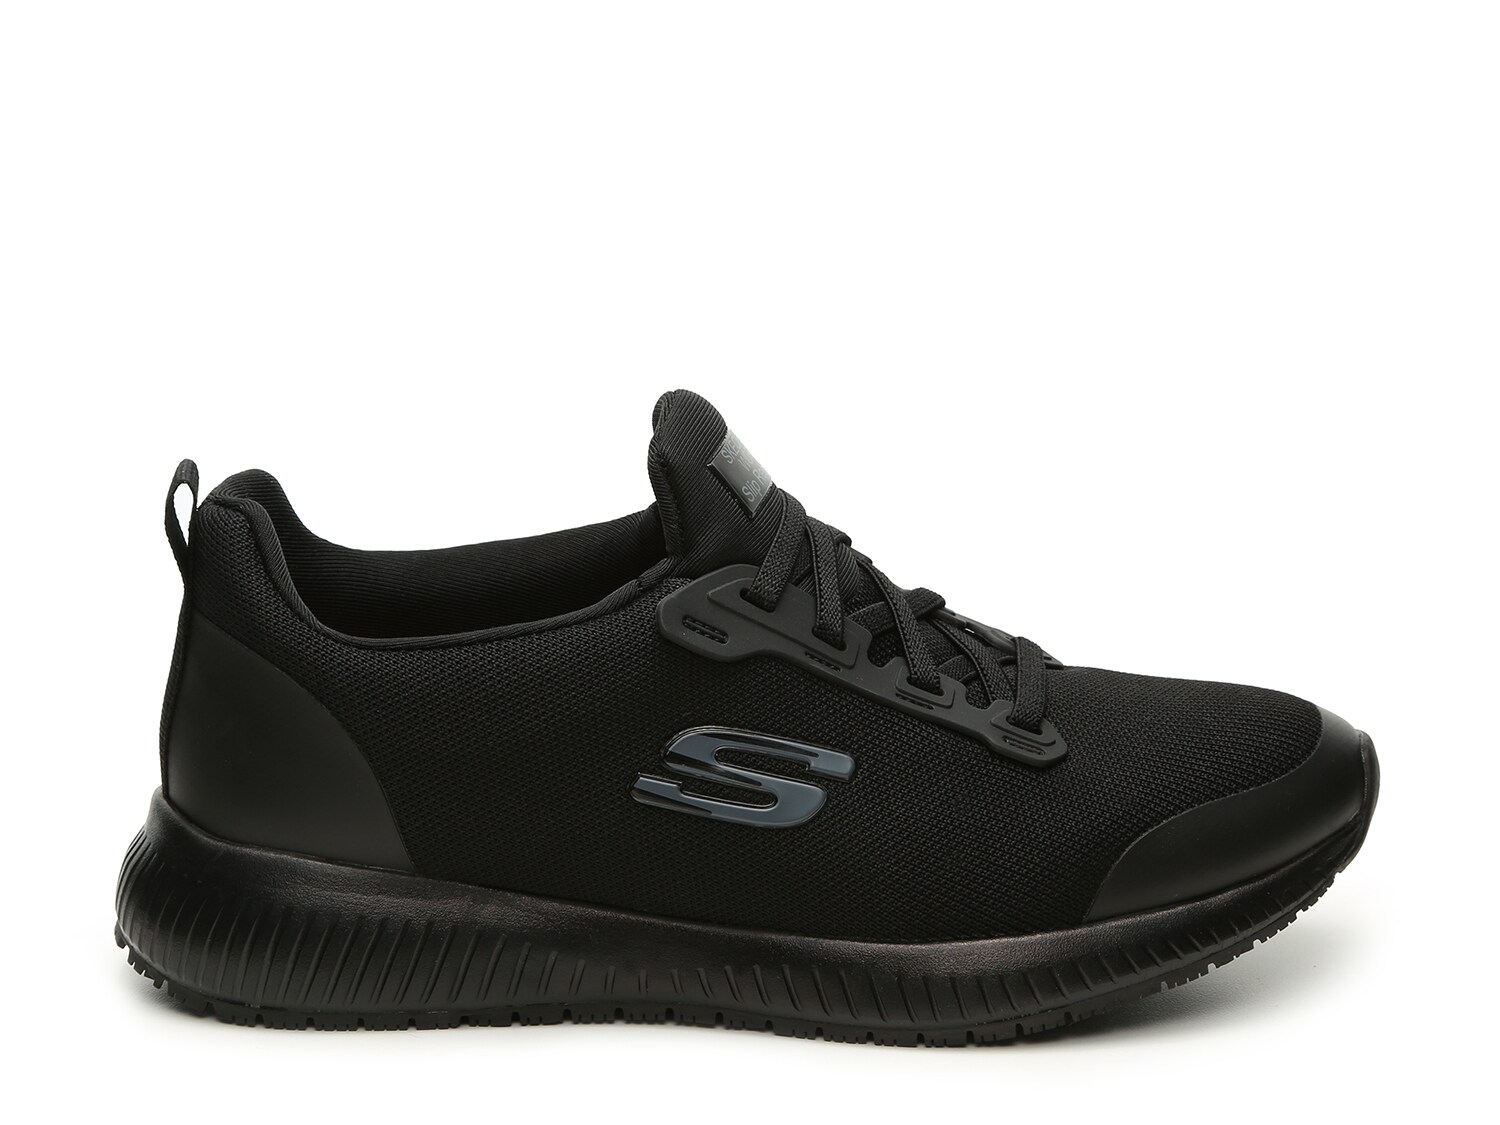 Skechers Relaxed Fit Squad Work Slip-On 